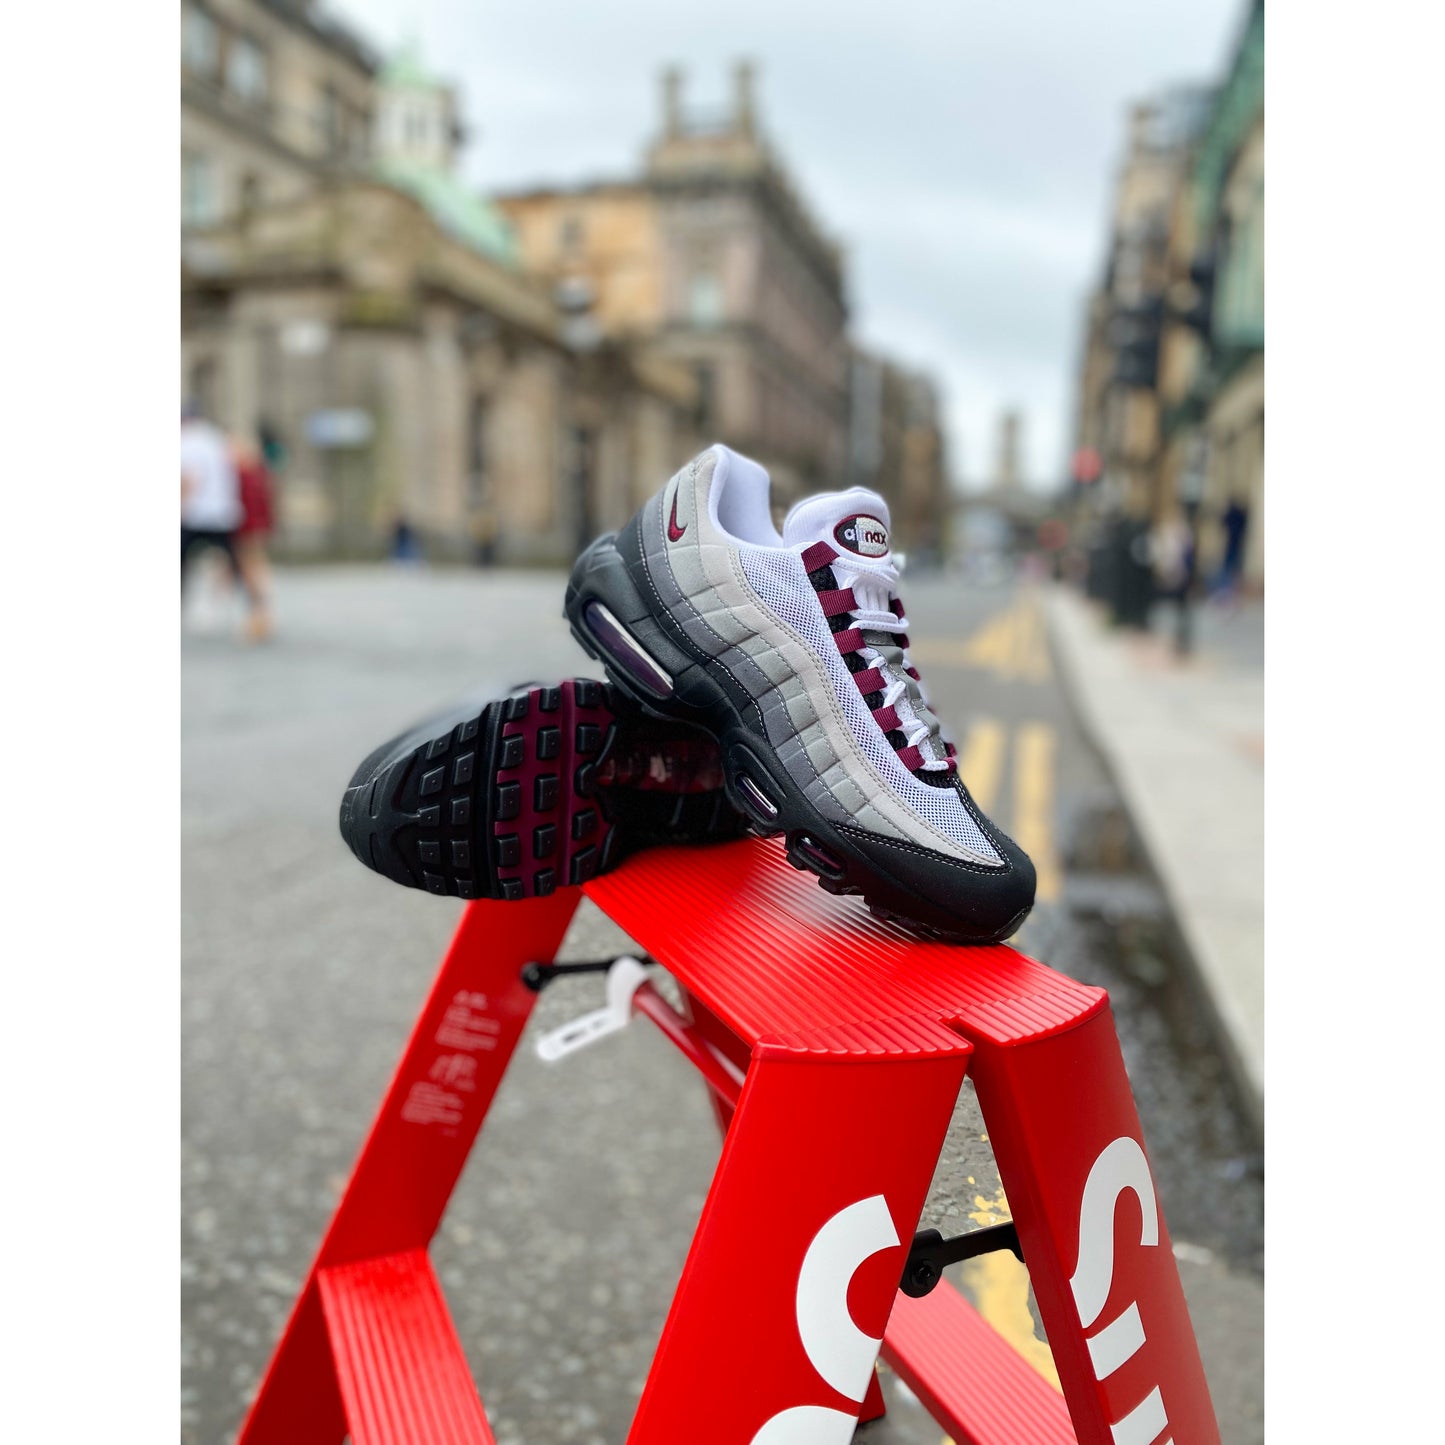 Nike Air Max 95 OG Beetroot by Nike from £255.99